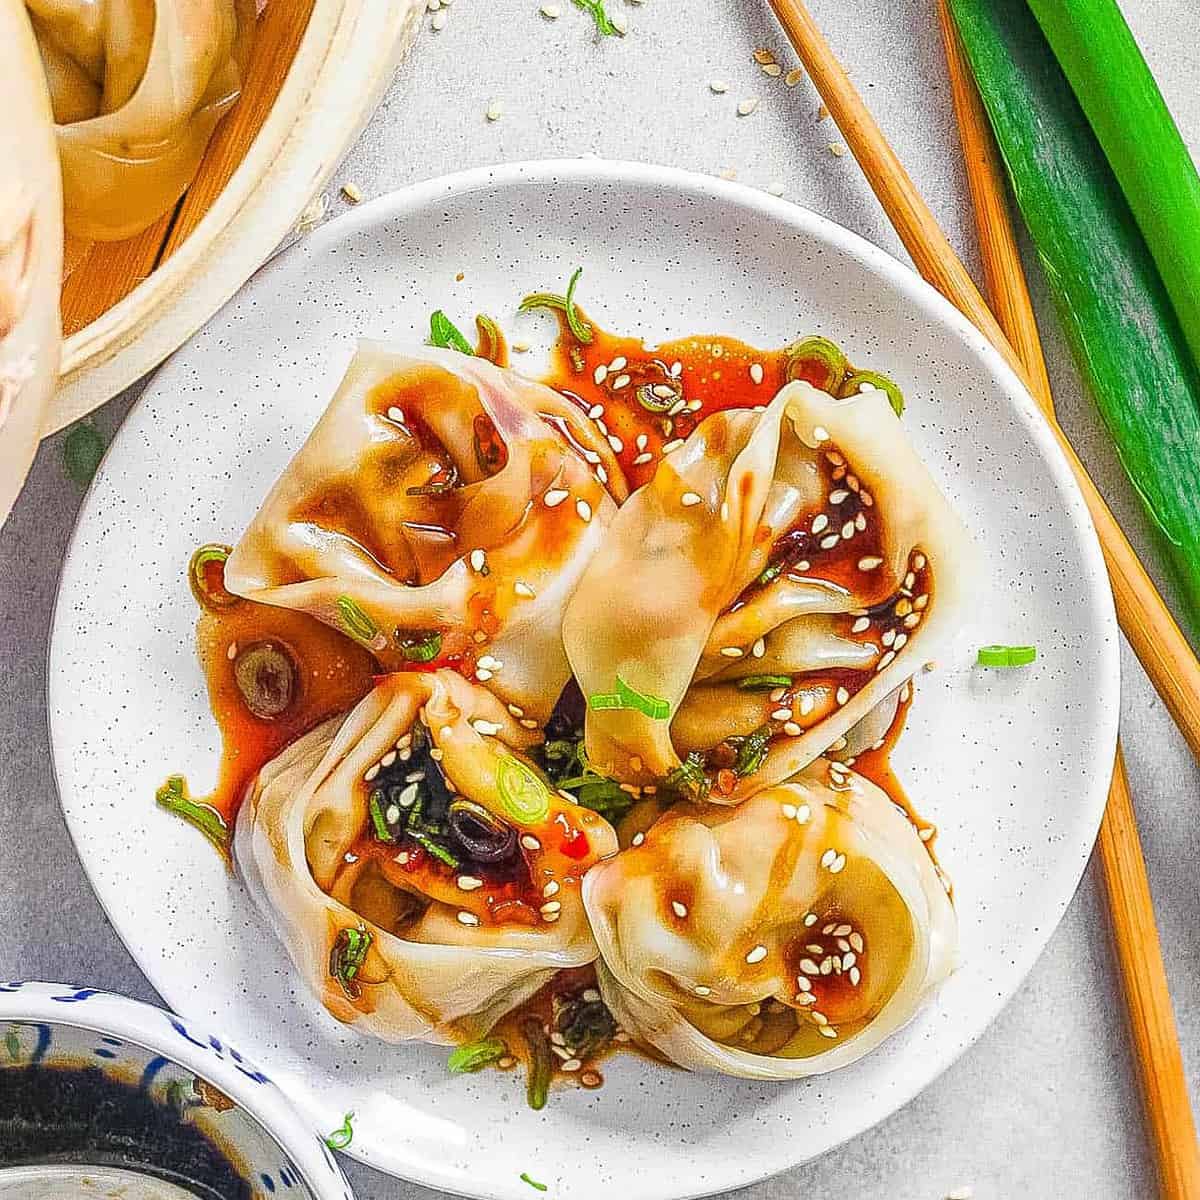  Impress your dinner guests by letting them in on the secret that your wonton wrappers are homemade.